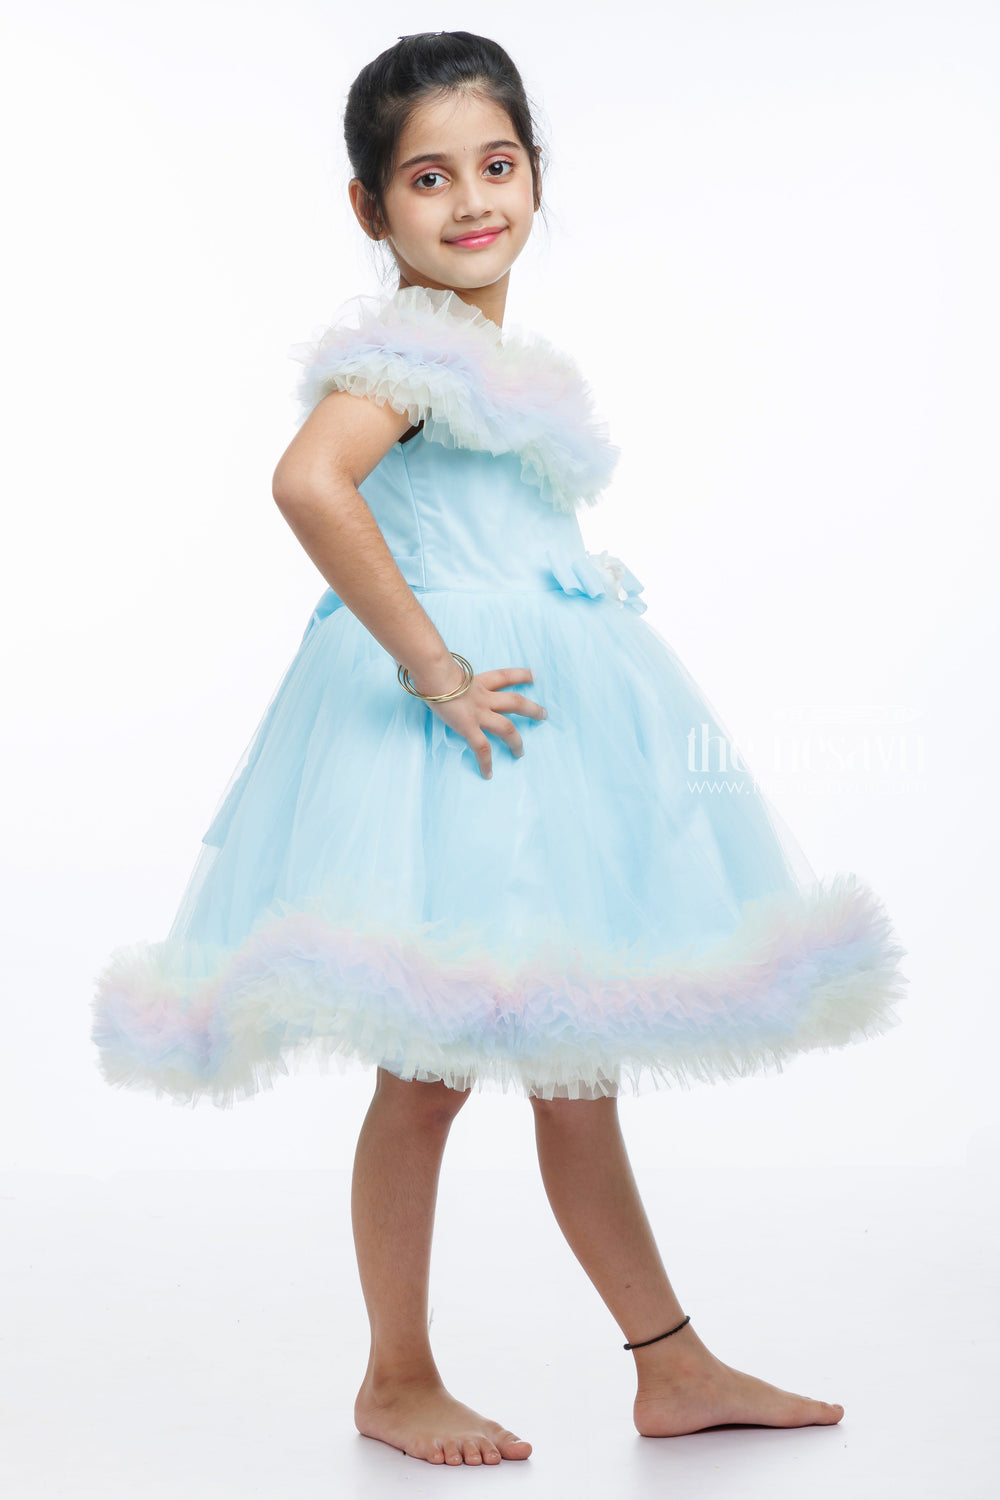 The Nesavu Girls Tutu Frock Rainbow Tulle Princess Party Frock: A Whirl of Color for Your Little Girl Nesavu Shop Luxury Gradient Tulle Party Dress for Girls | Personalized Birthday Princess Frock | The Nesavu